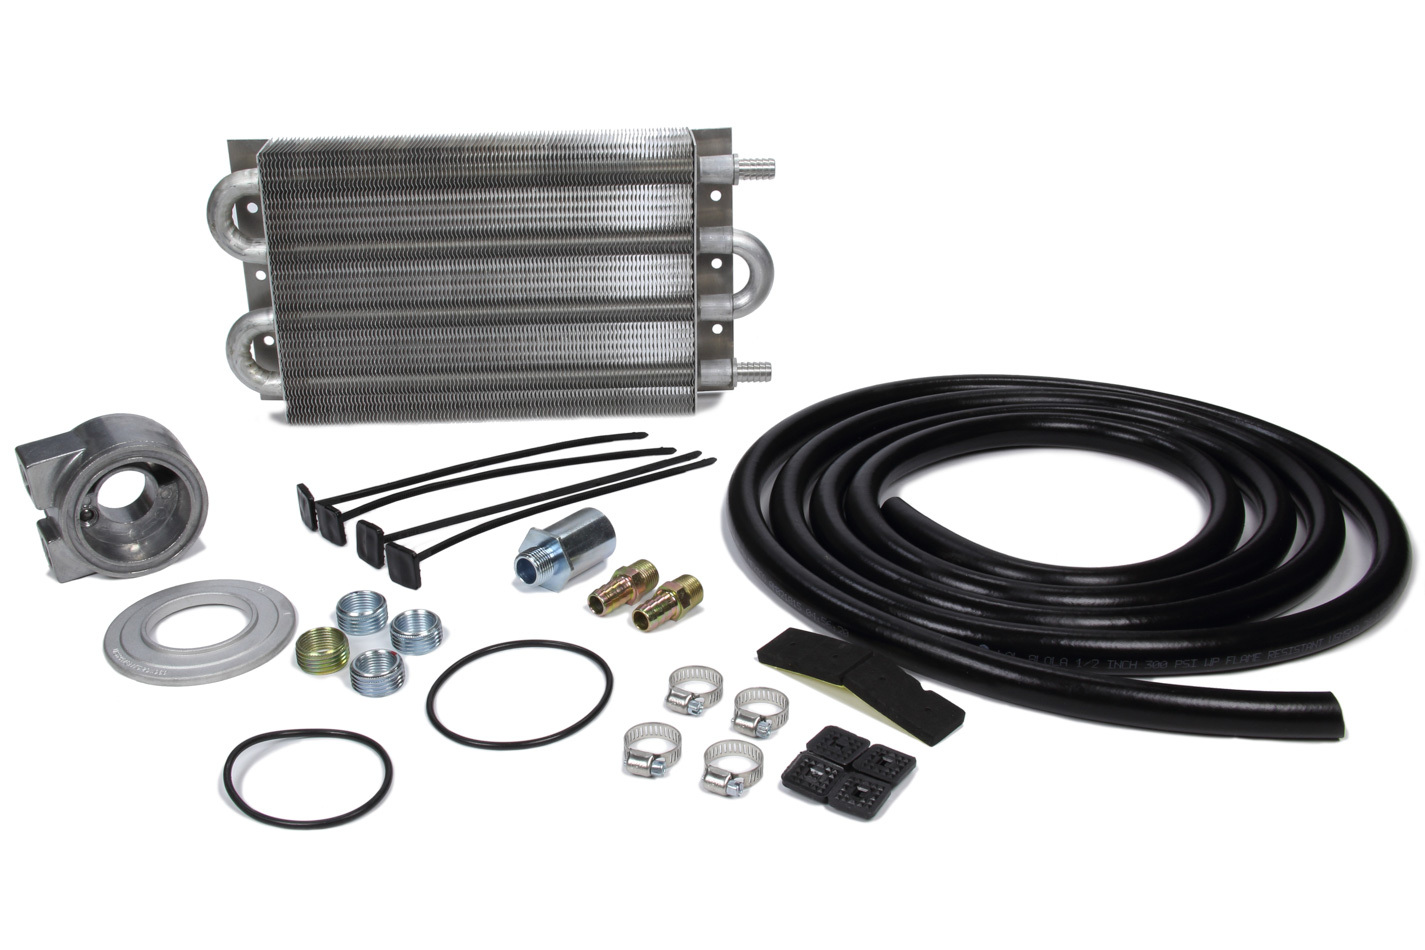 Perma Cool 10189 Fluid Cooler, Engine Oil System, 12.500 x 7.500 x 0.750 in, Tube Type, 1/2 in Hose Barb Inlet / Outlet, Adapter / Brackets / Fitting / Hardware / Hose, Aluminum, Natural, Kit